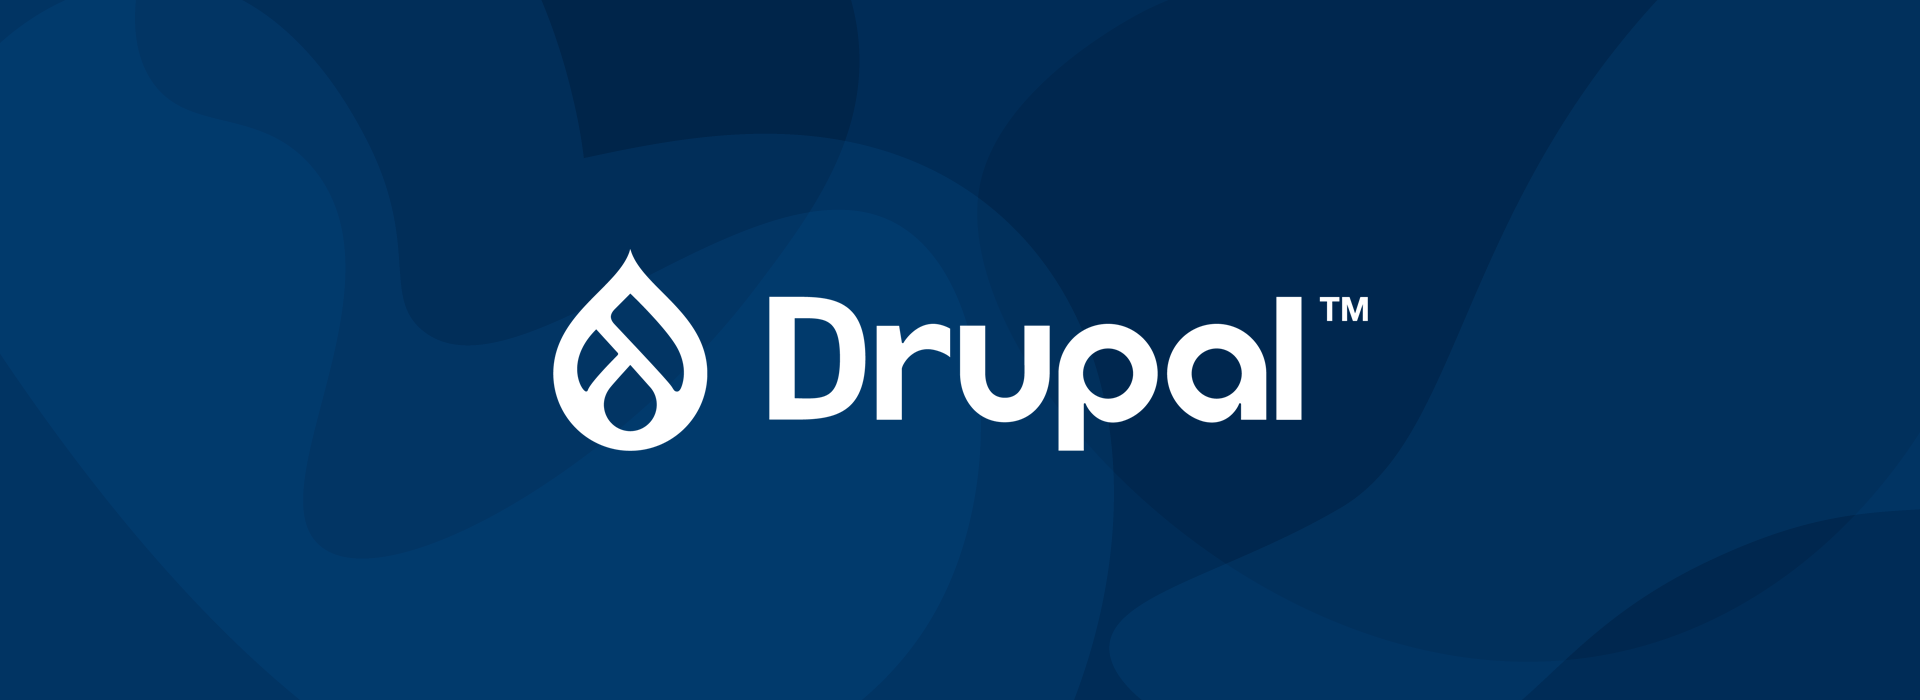 Featured image for “Drupal Releases Security Updates”